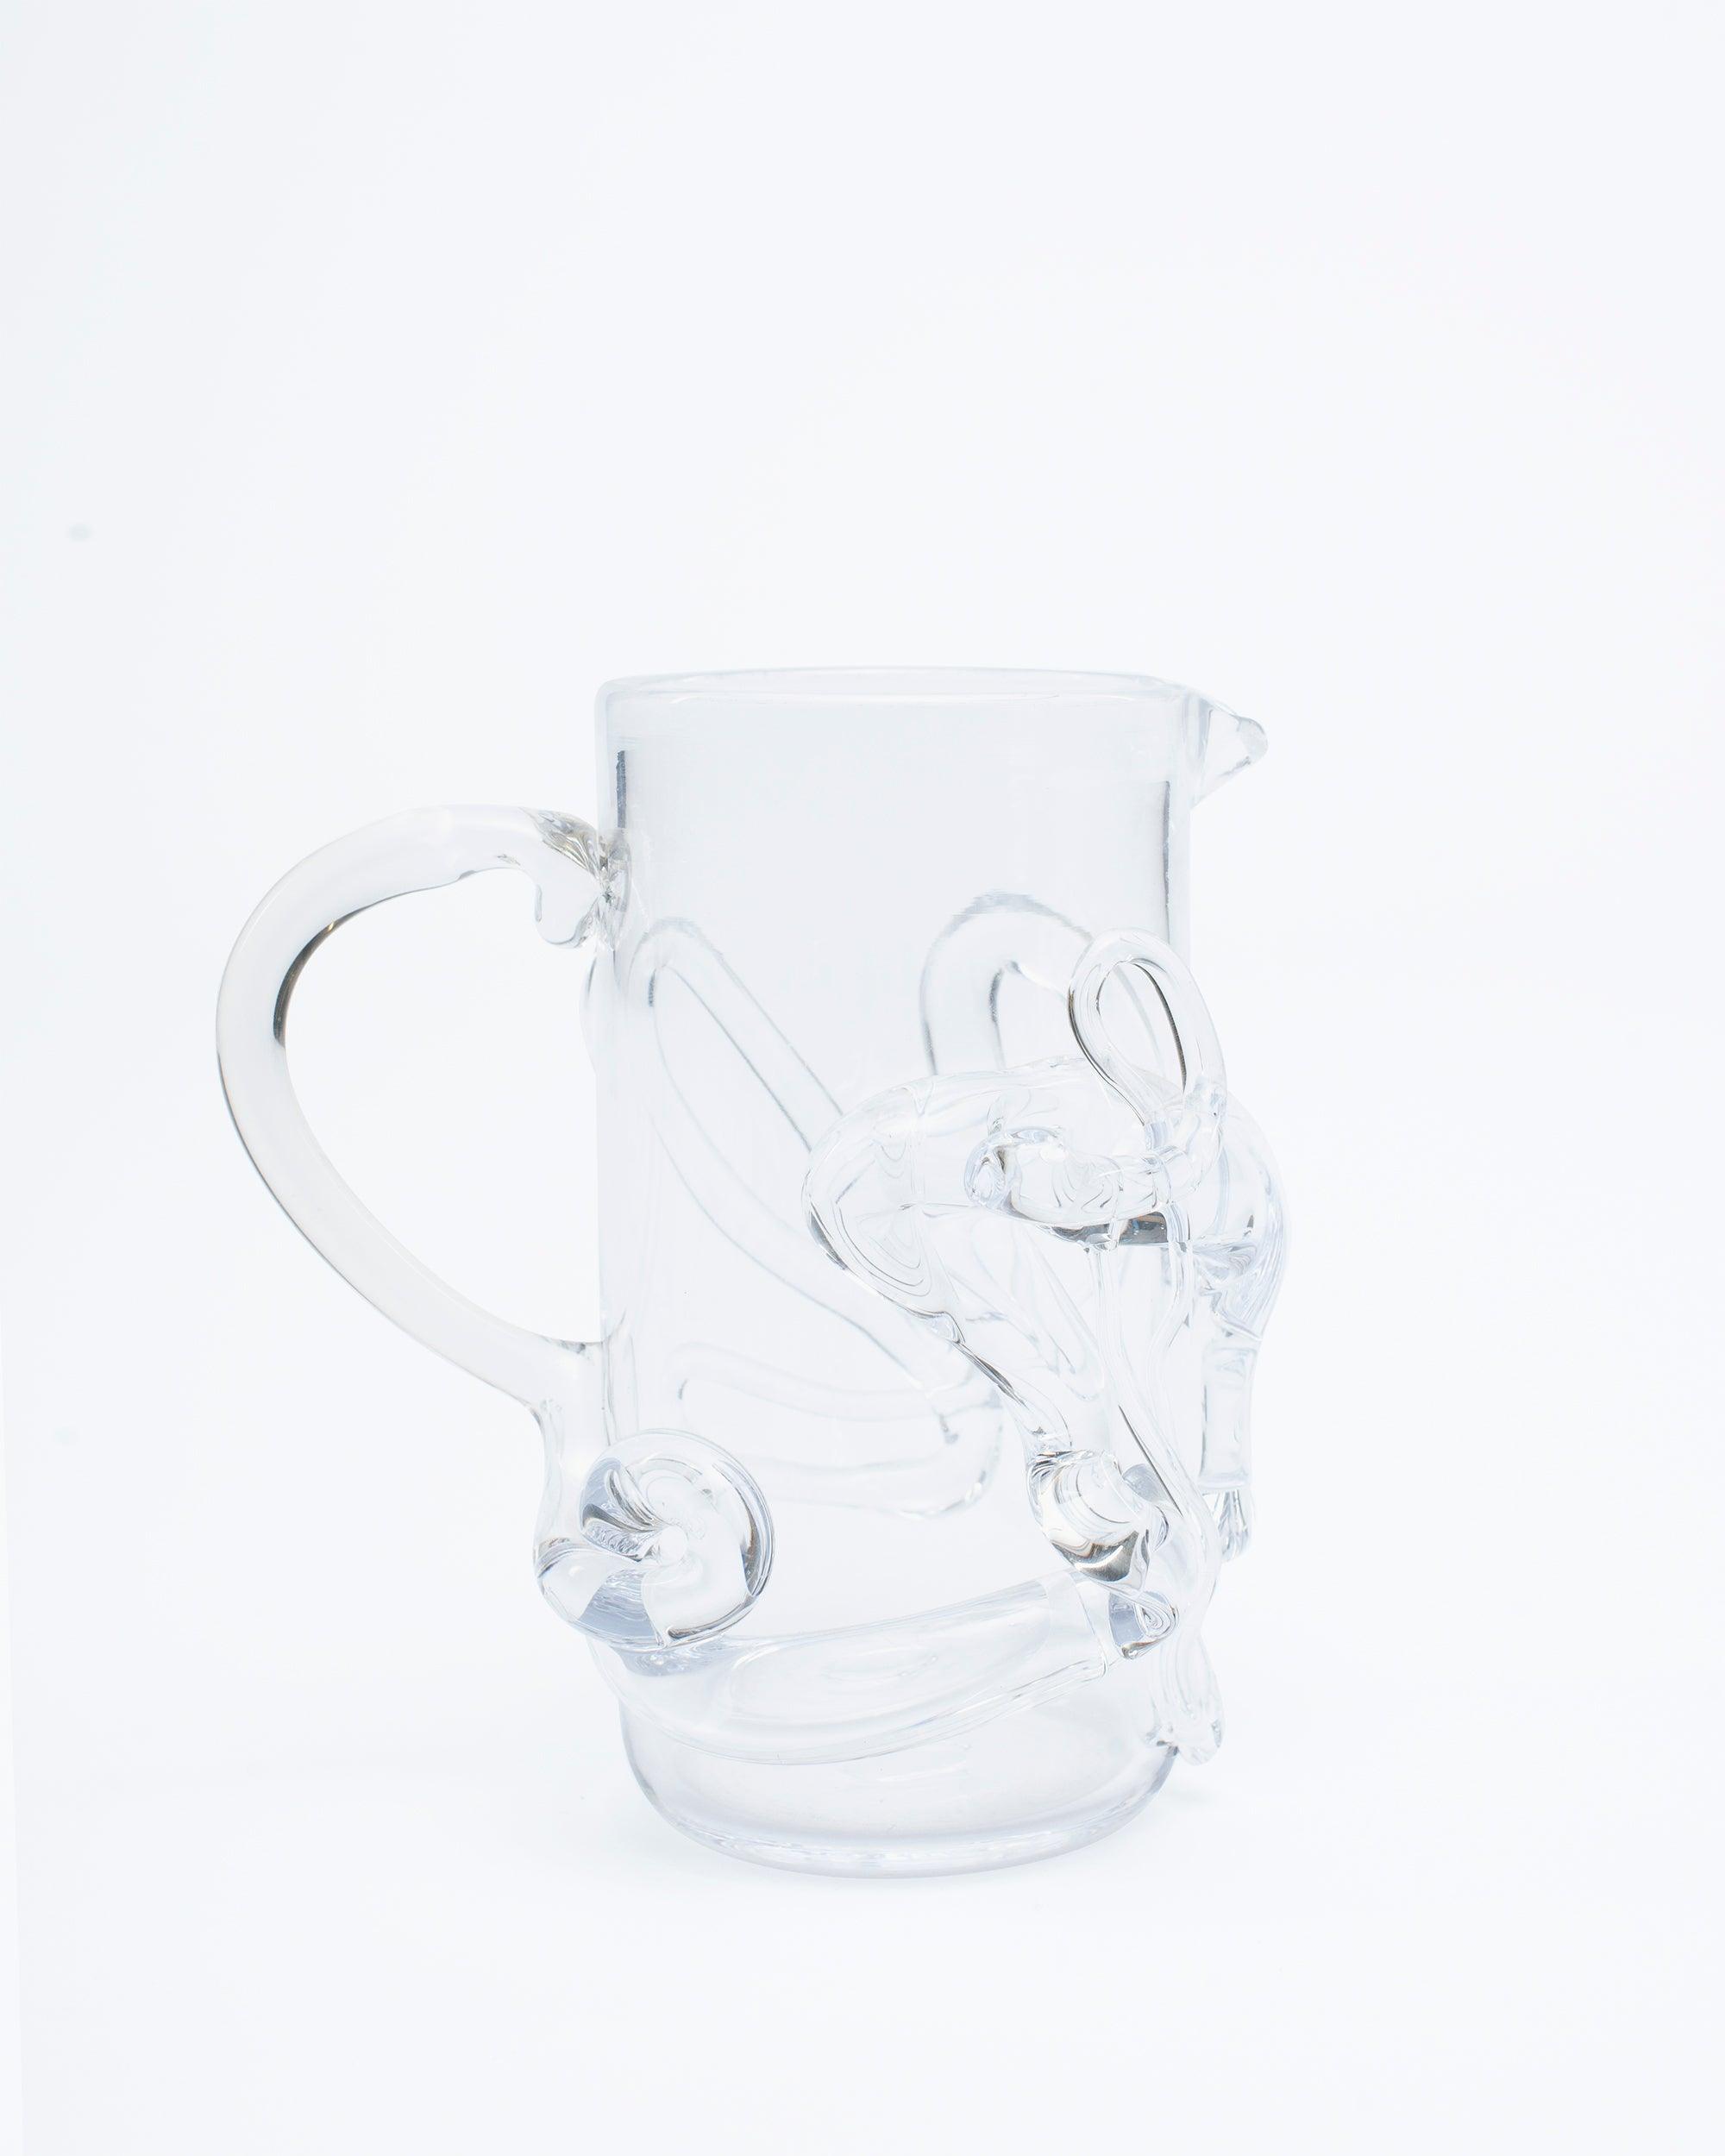 Glass pitcher with melted glass details with handle on right side on light focus background